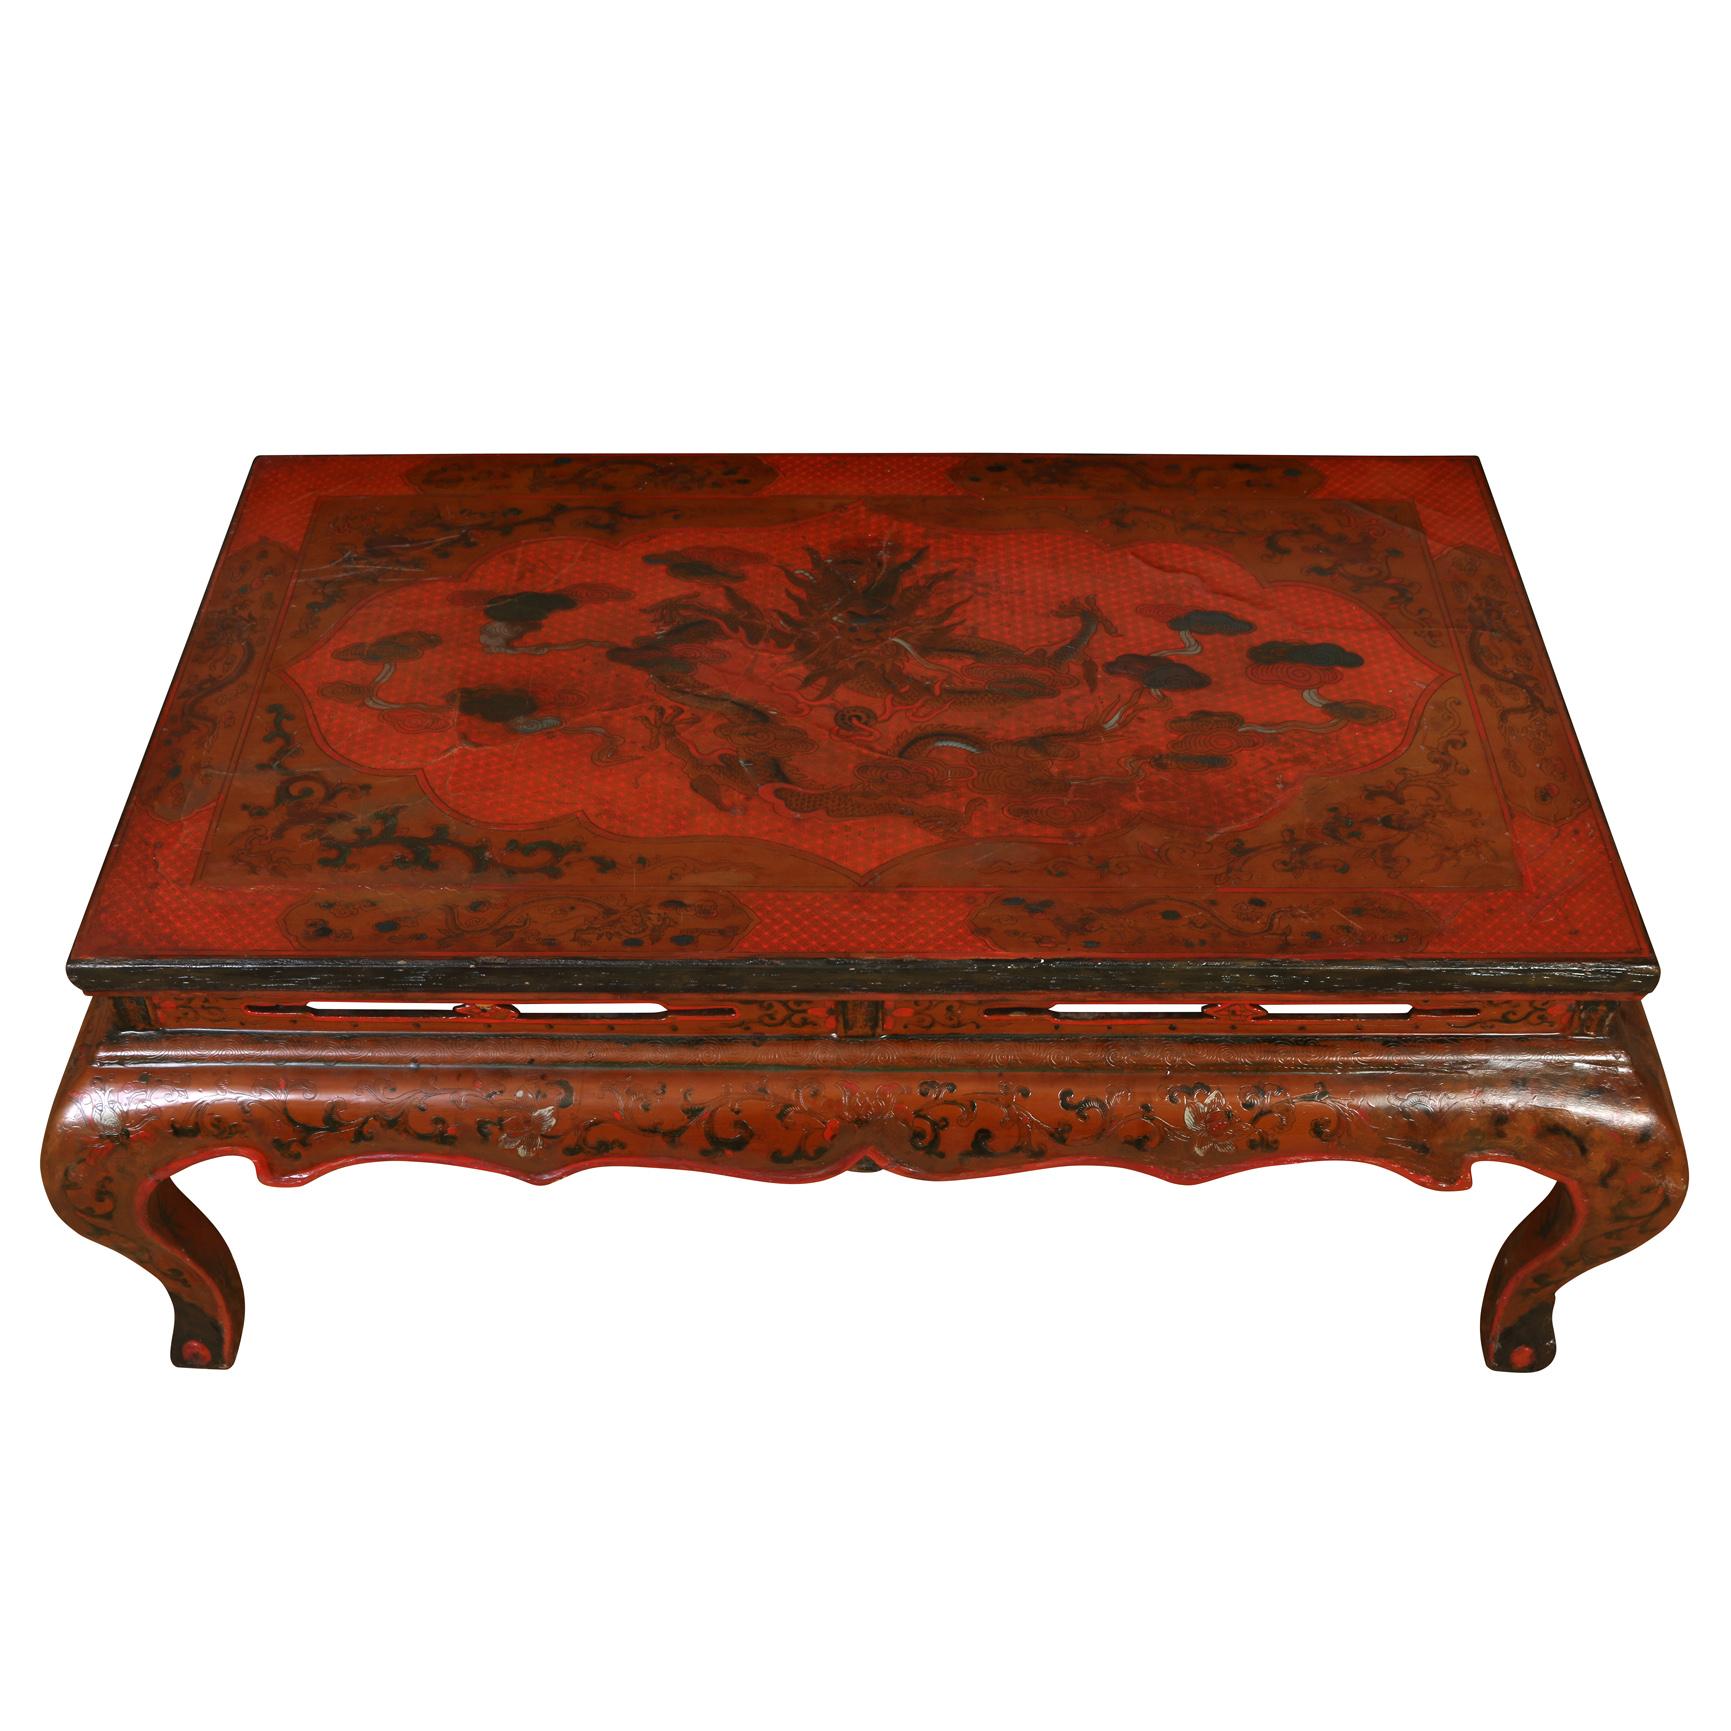 Chinese Red Dragon Motif Coromandel Lacquer Coffee Table In Good Condition For Sale In Locust Valley, NY